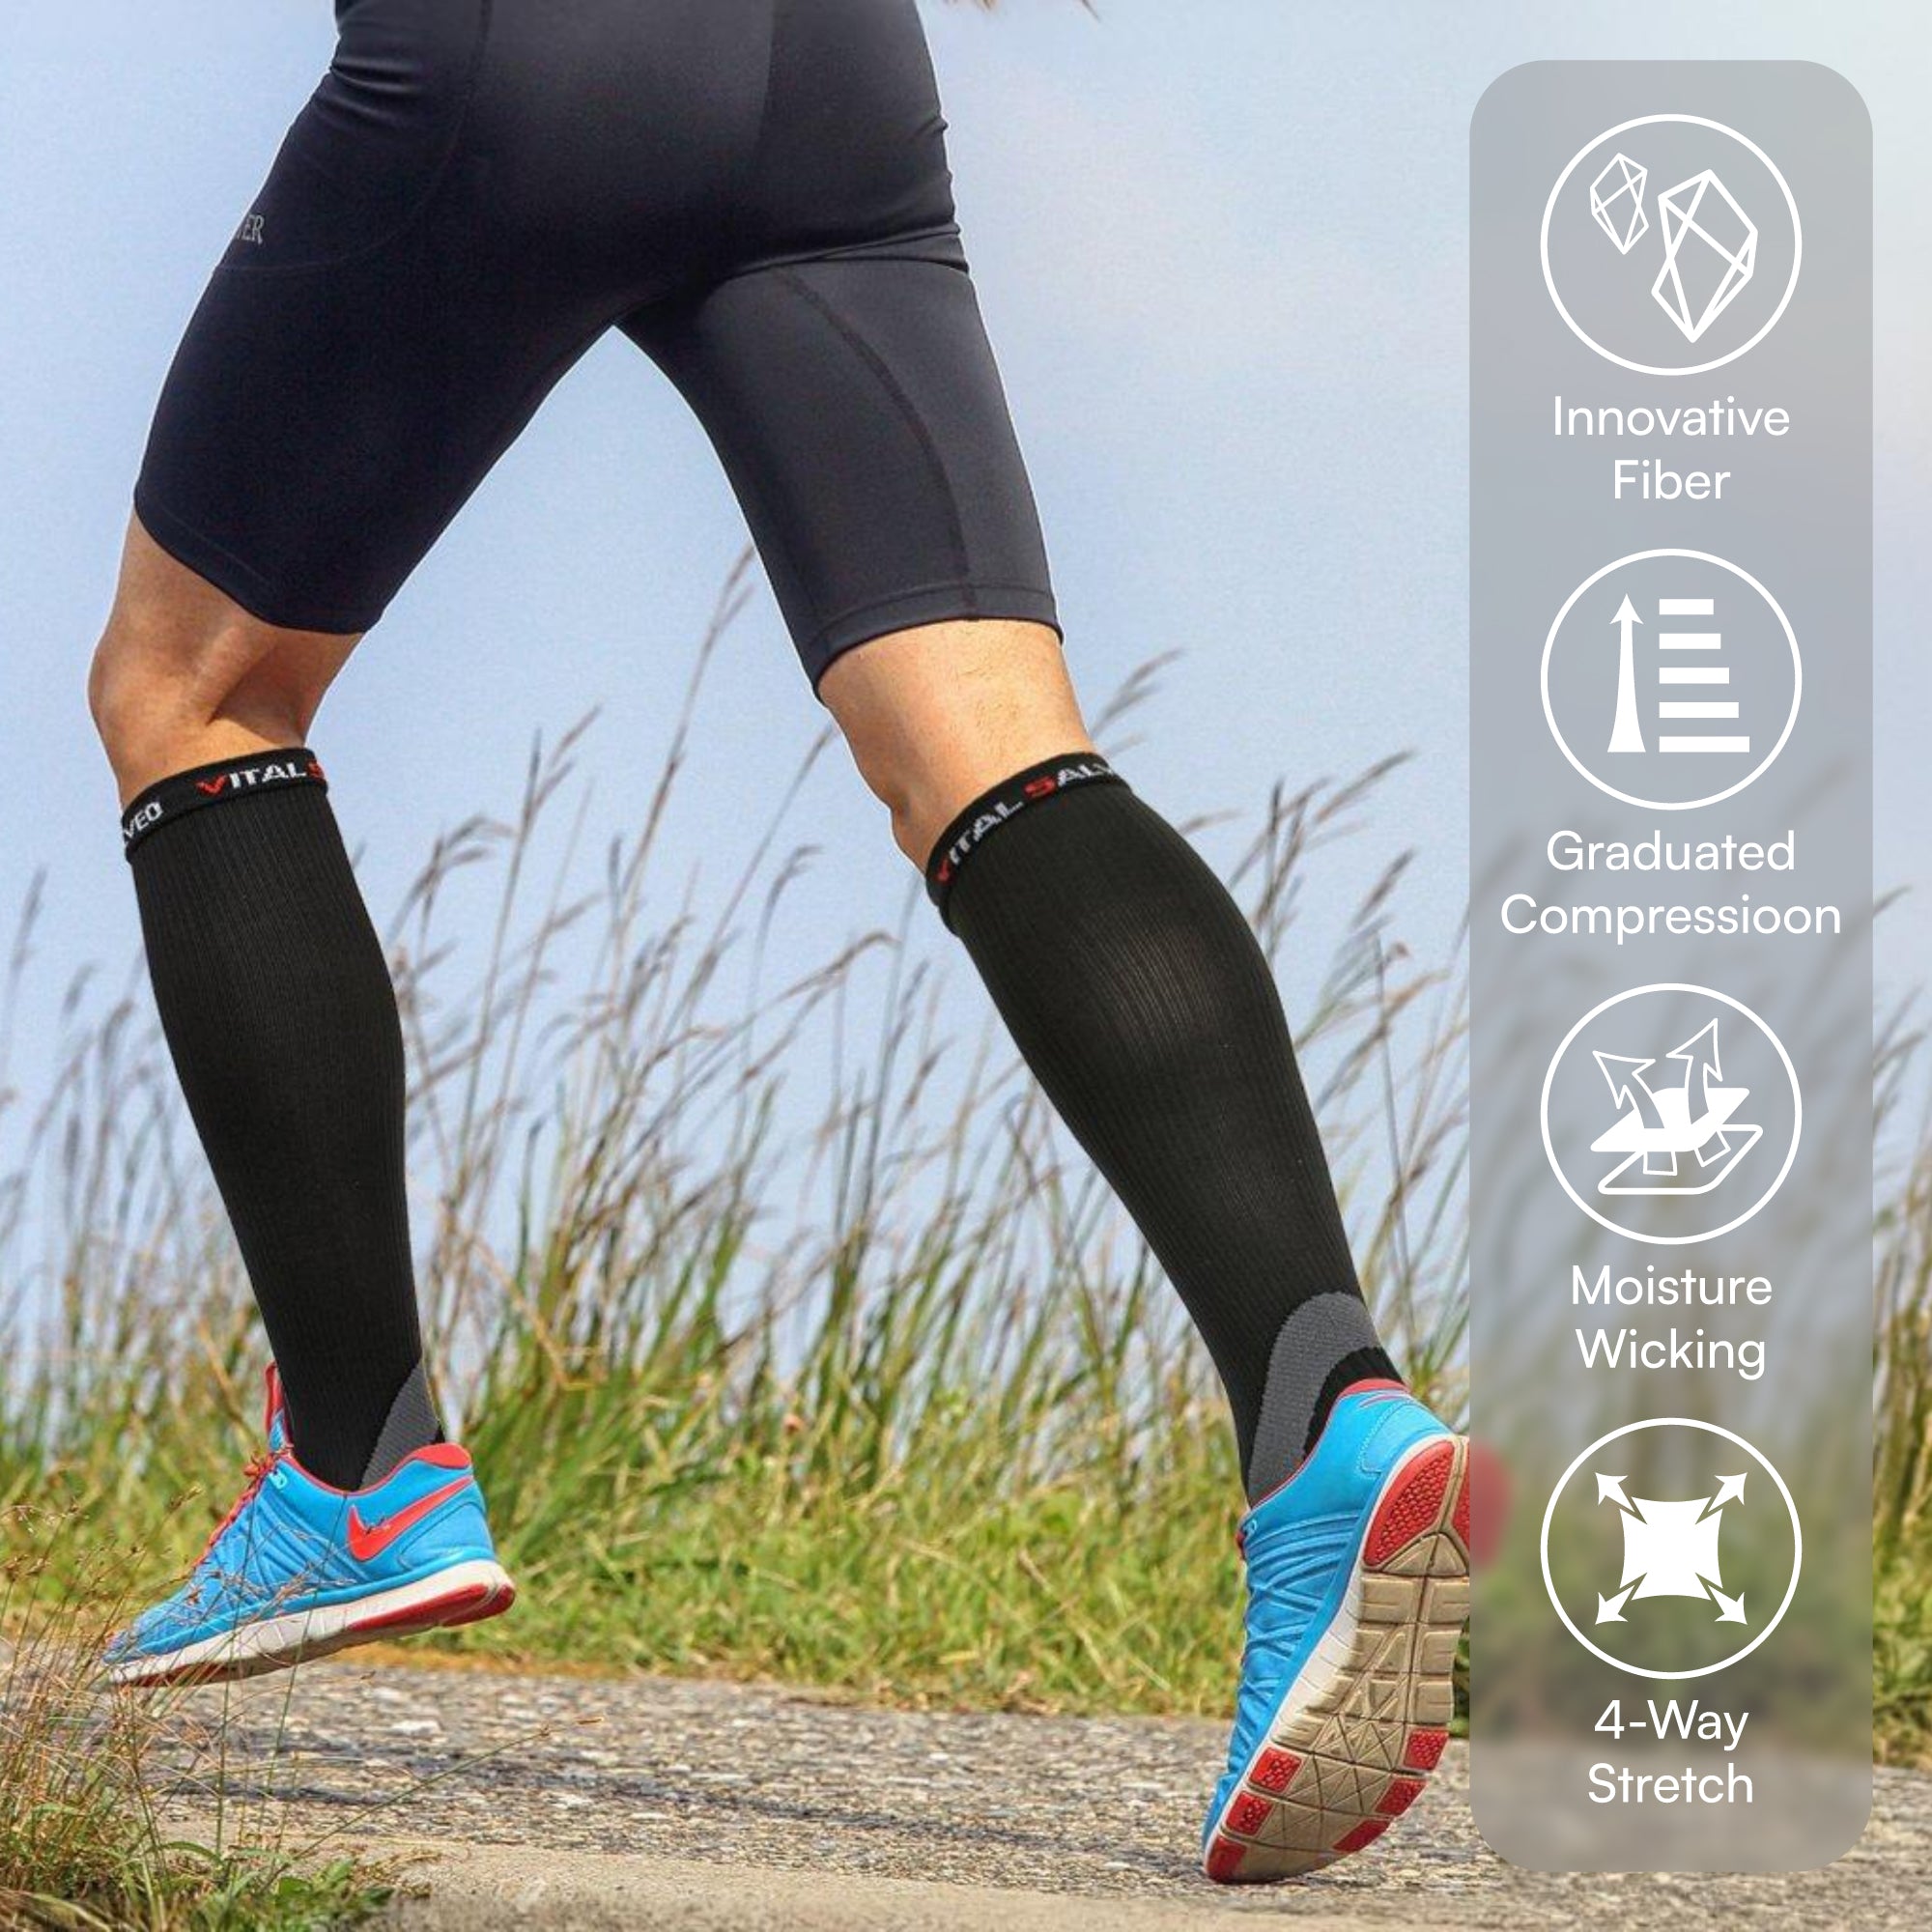 Arch Support Performance Compression Calf Socks